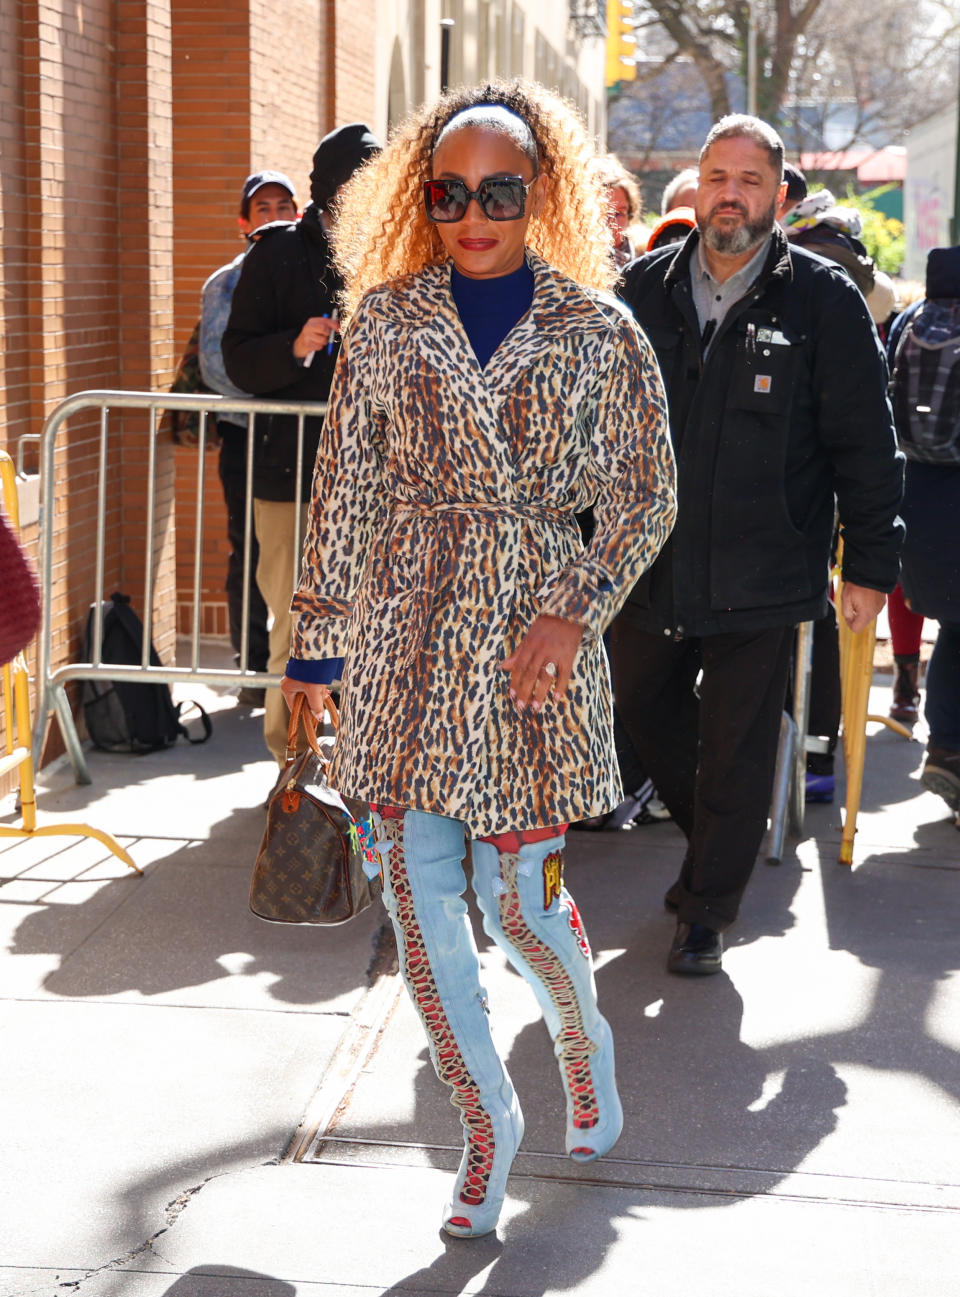 Mel B is seen arriving to her interview with "The View" in blue Philipp Plein heels